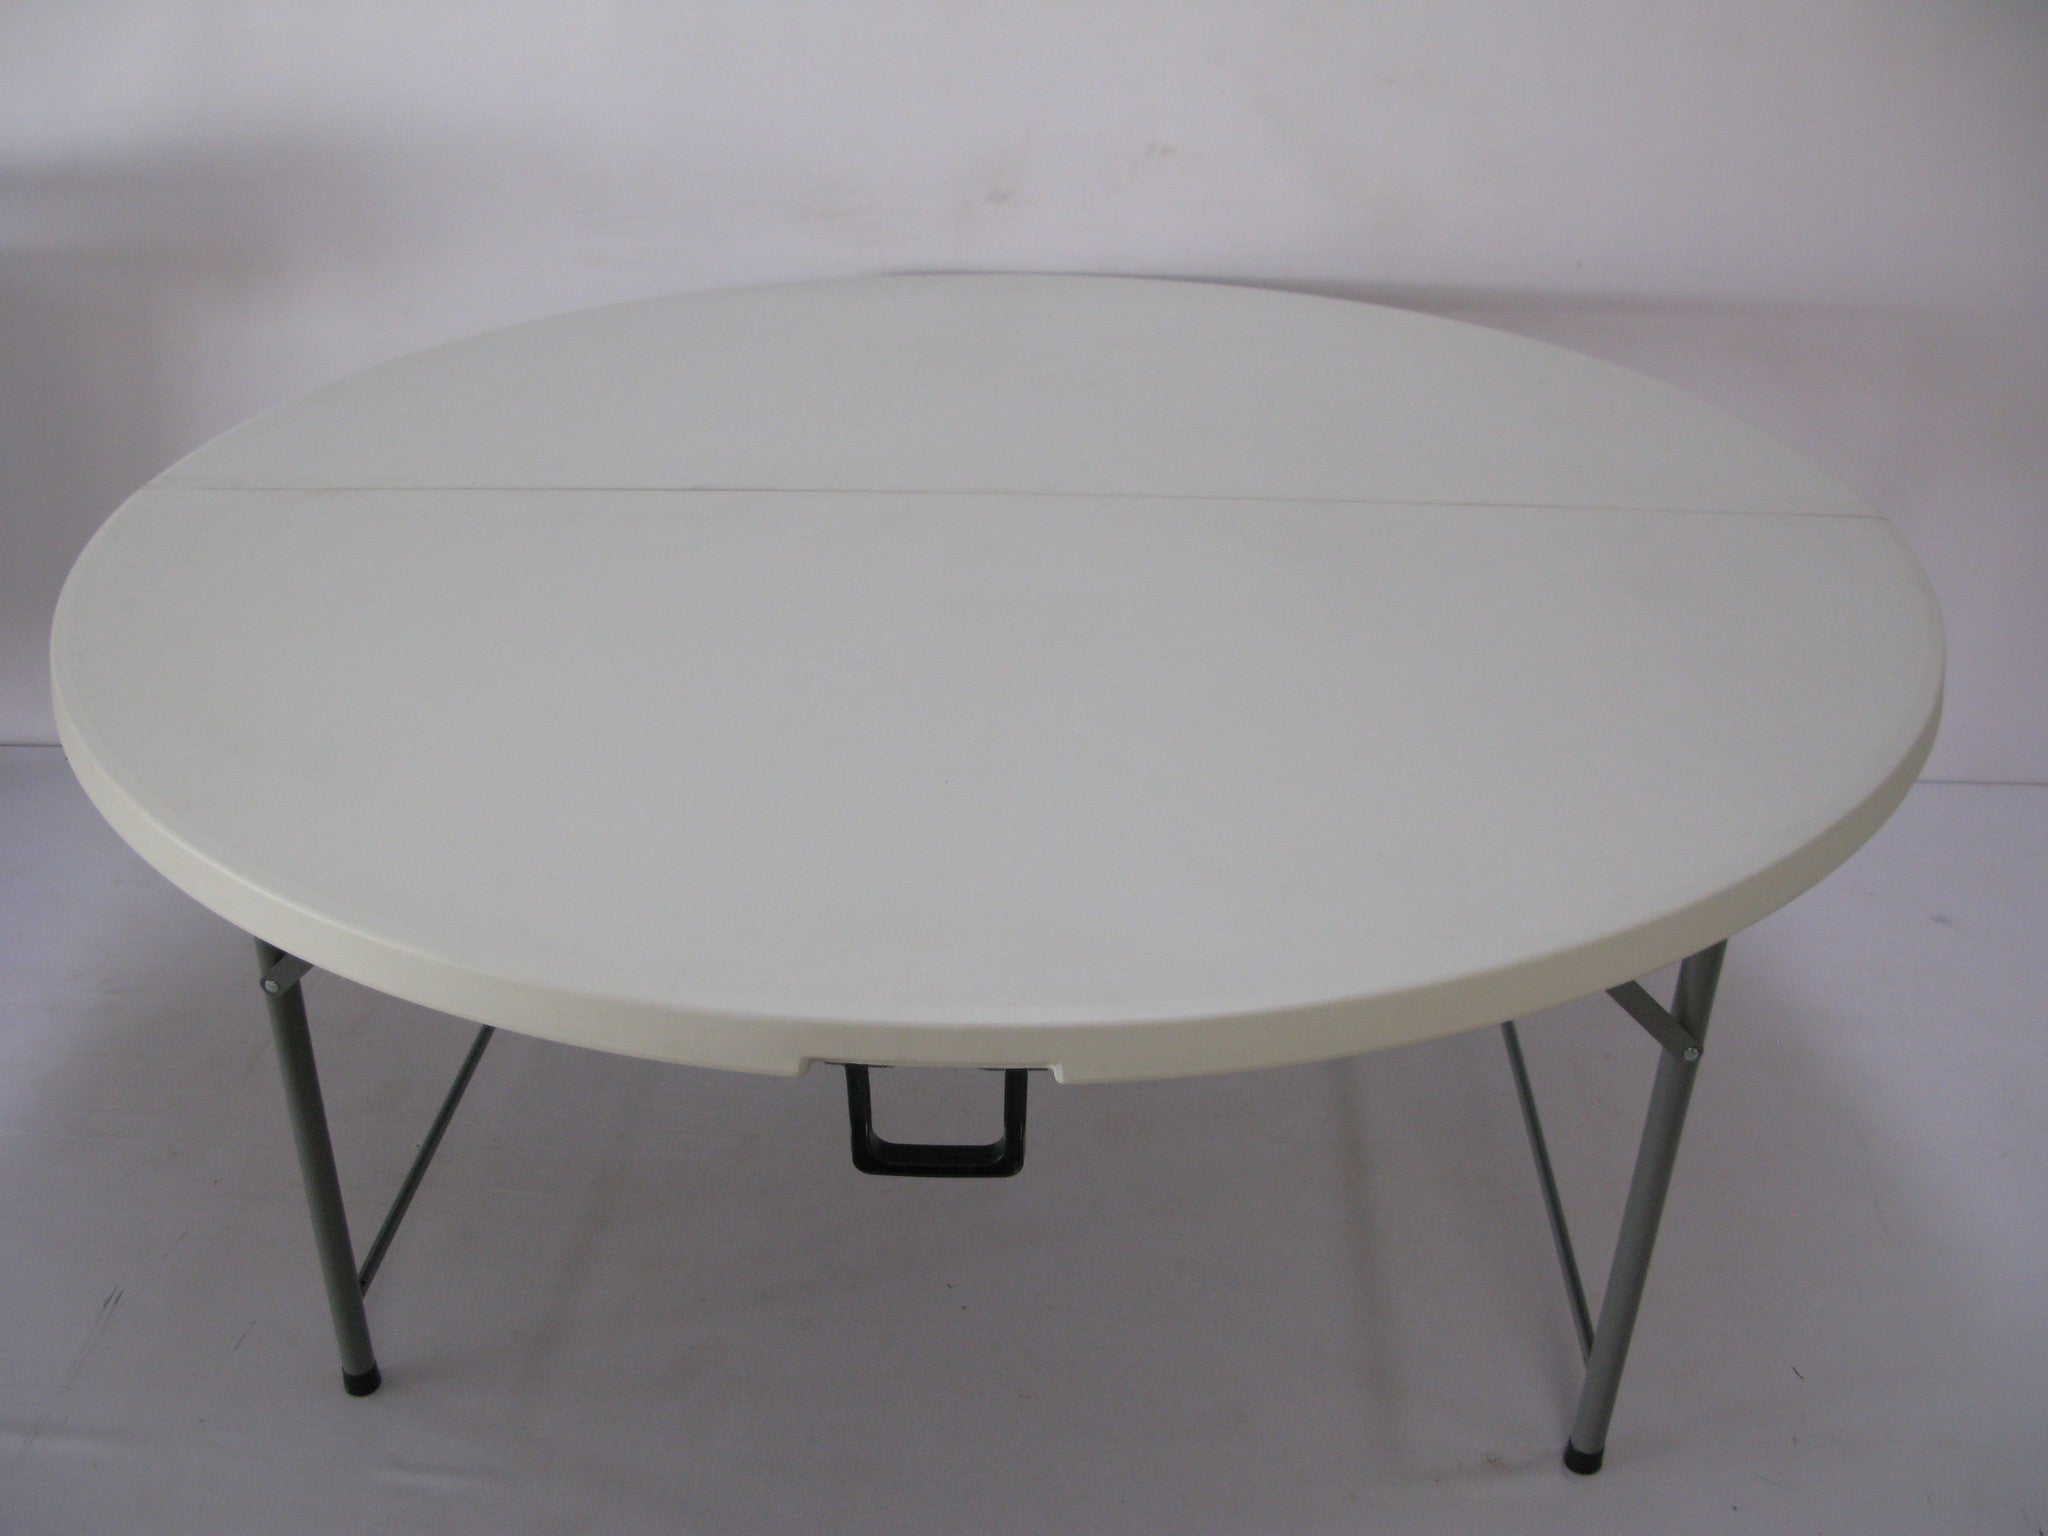 Rou003 Fold In Half Round Plastic Tables 1800mm Seats 10 12 People Moolla Furniture Corp Cc